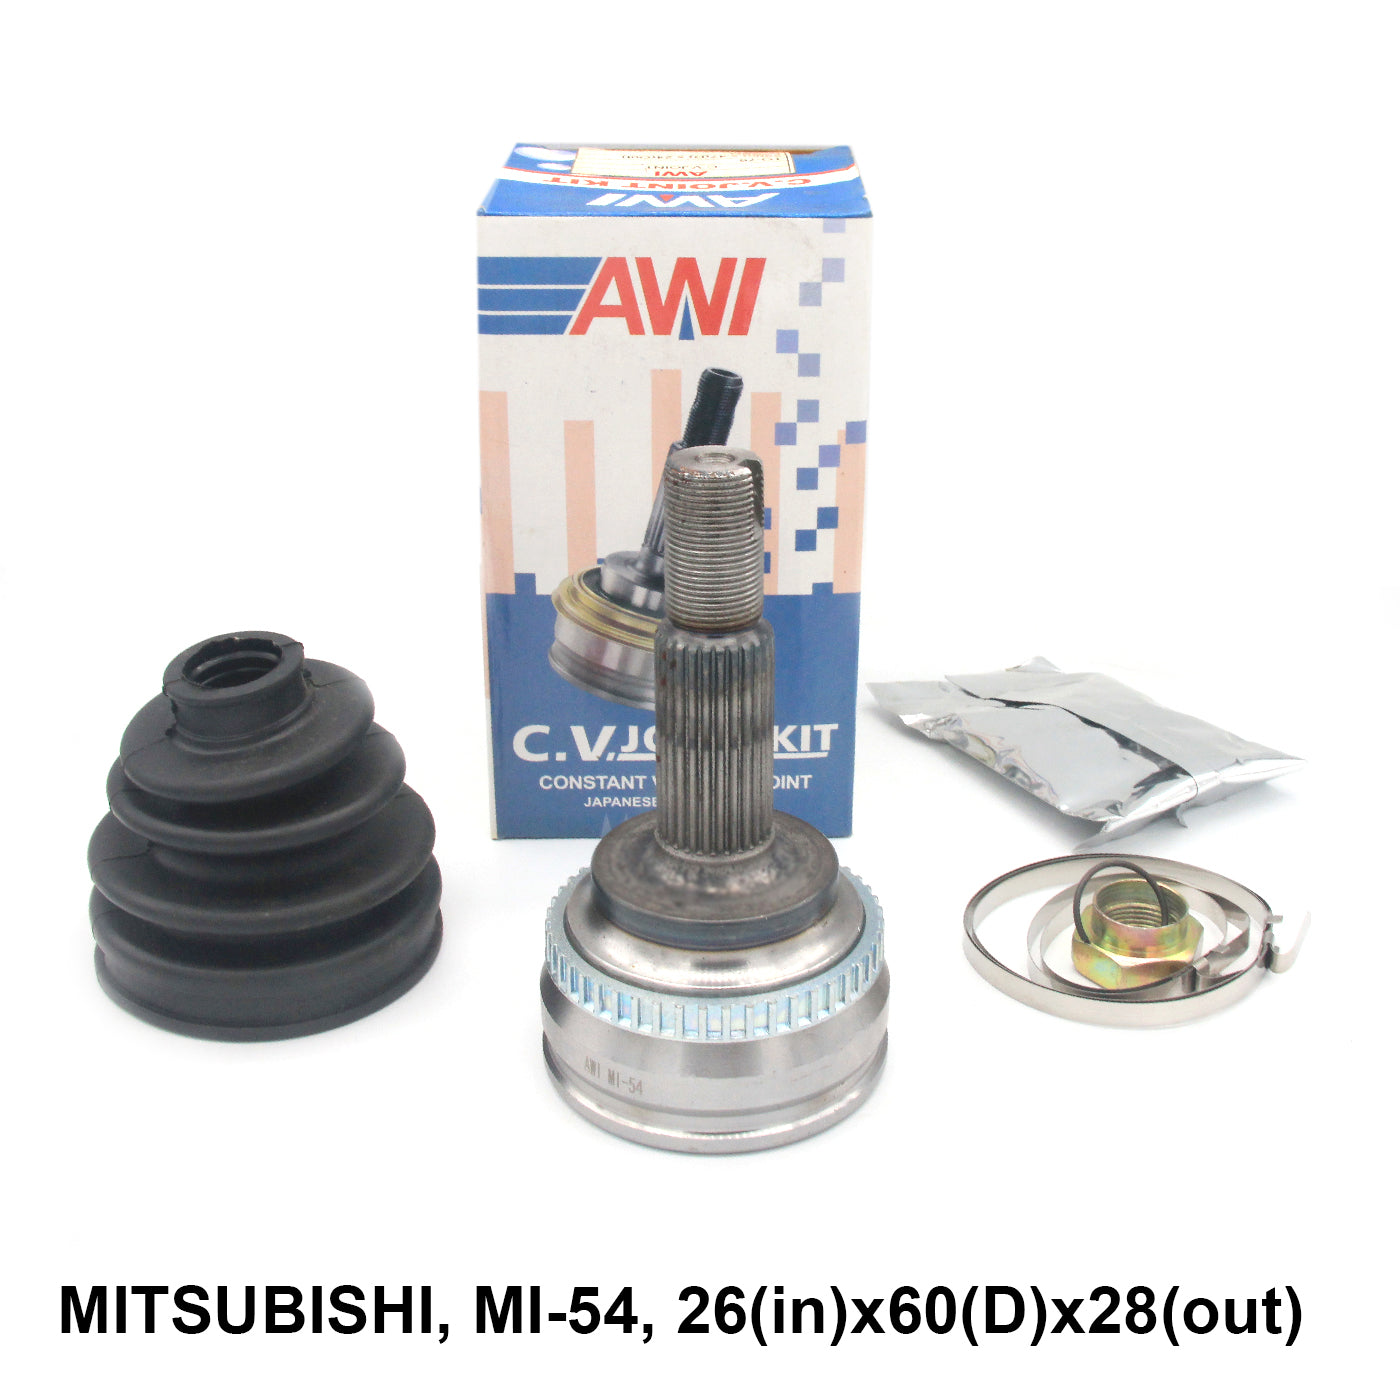 CV Joint၊ AWI၊ MI-54၊ 26(in)x60(D)x28(out) (007948)